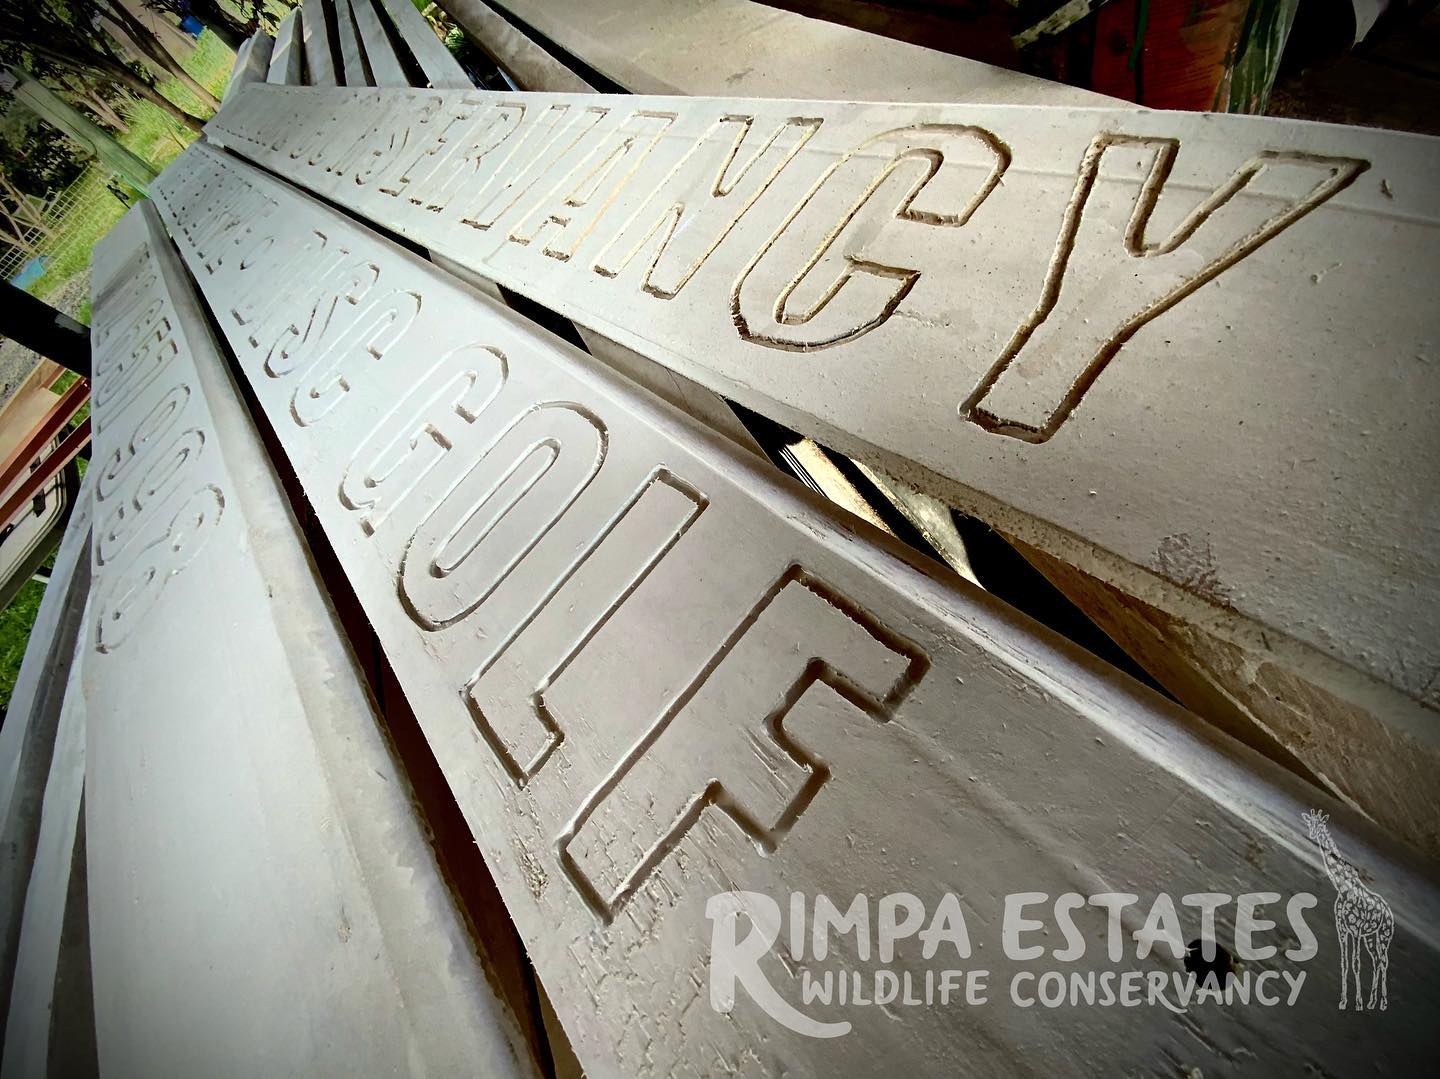 I’m working on a new sign for entrance to Rimpa Estates to welcome everyone to the Kenya Open 2023 disc golf tournament in January.
#discgolf #wildlifeconservancy #kenya #kenyaopen2023 #rimpaestates